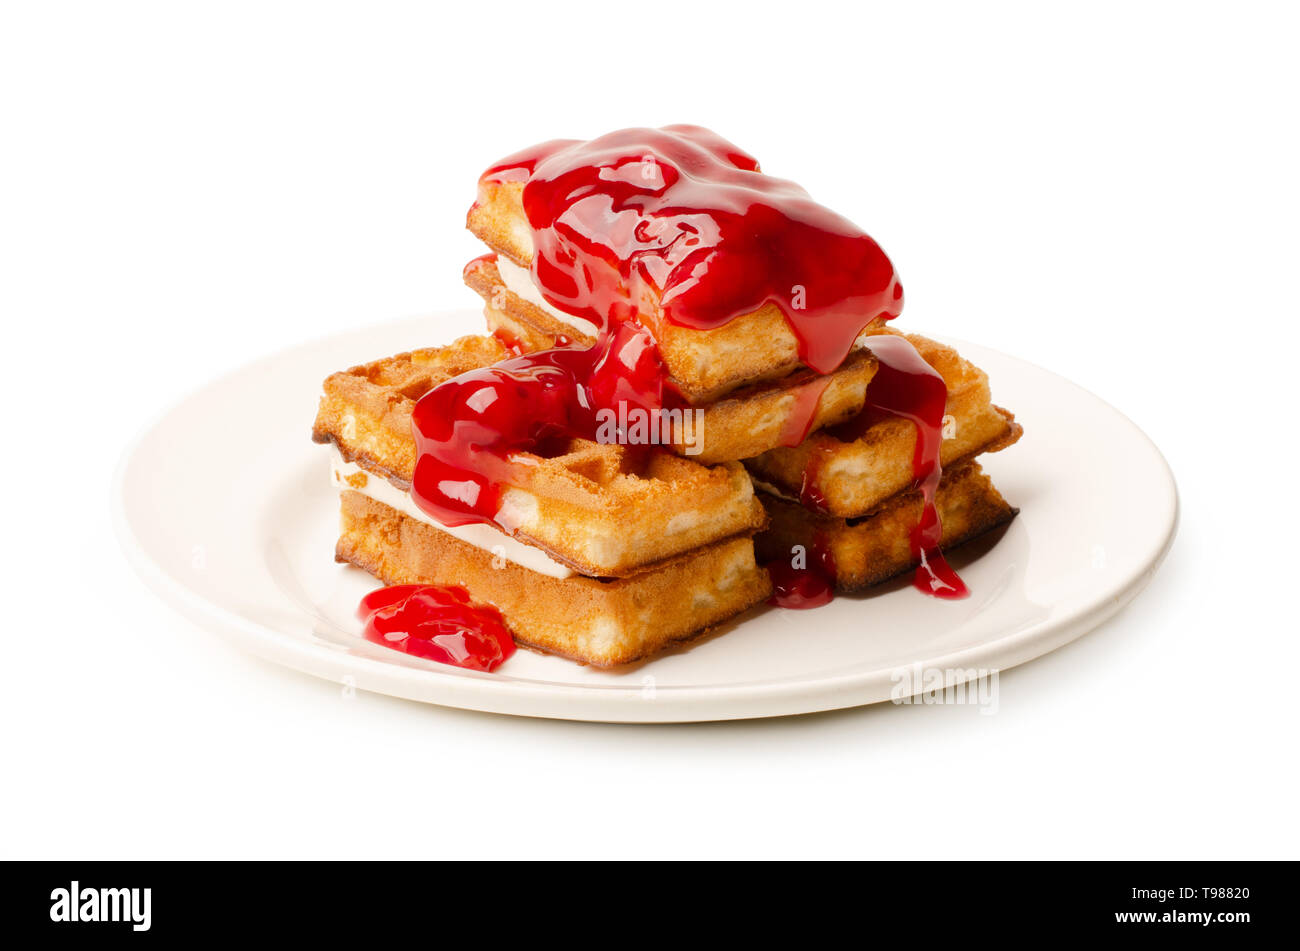 Portion of viennese waffles with sweet strawberry syrup isolated on a white background Stock Photo